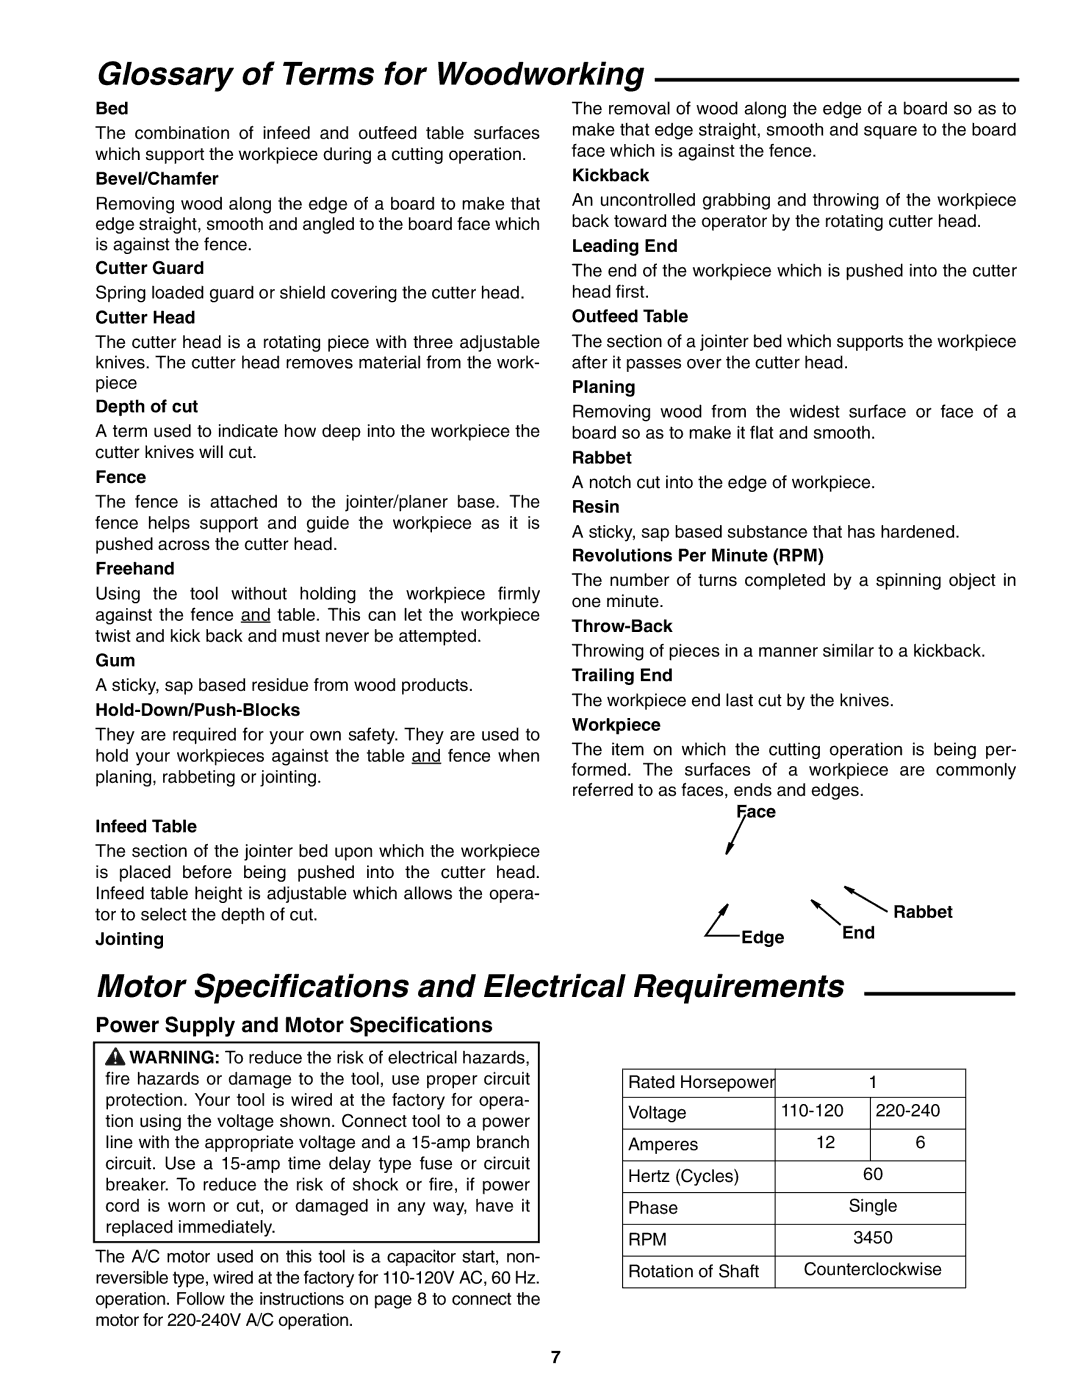 RIDGID JP06101 manual Glossary of Terms for Woodworking, Motor Specifications and Electrical Requirements 